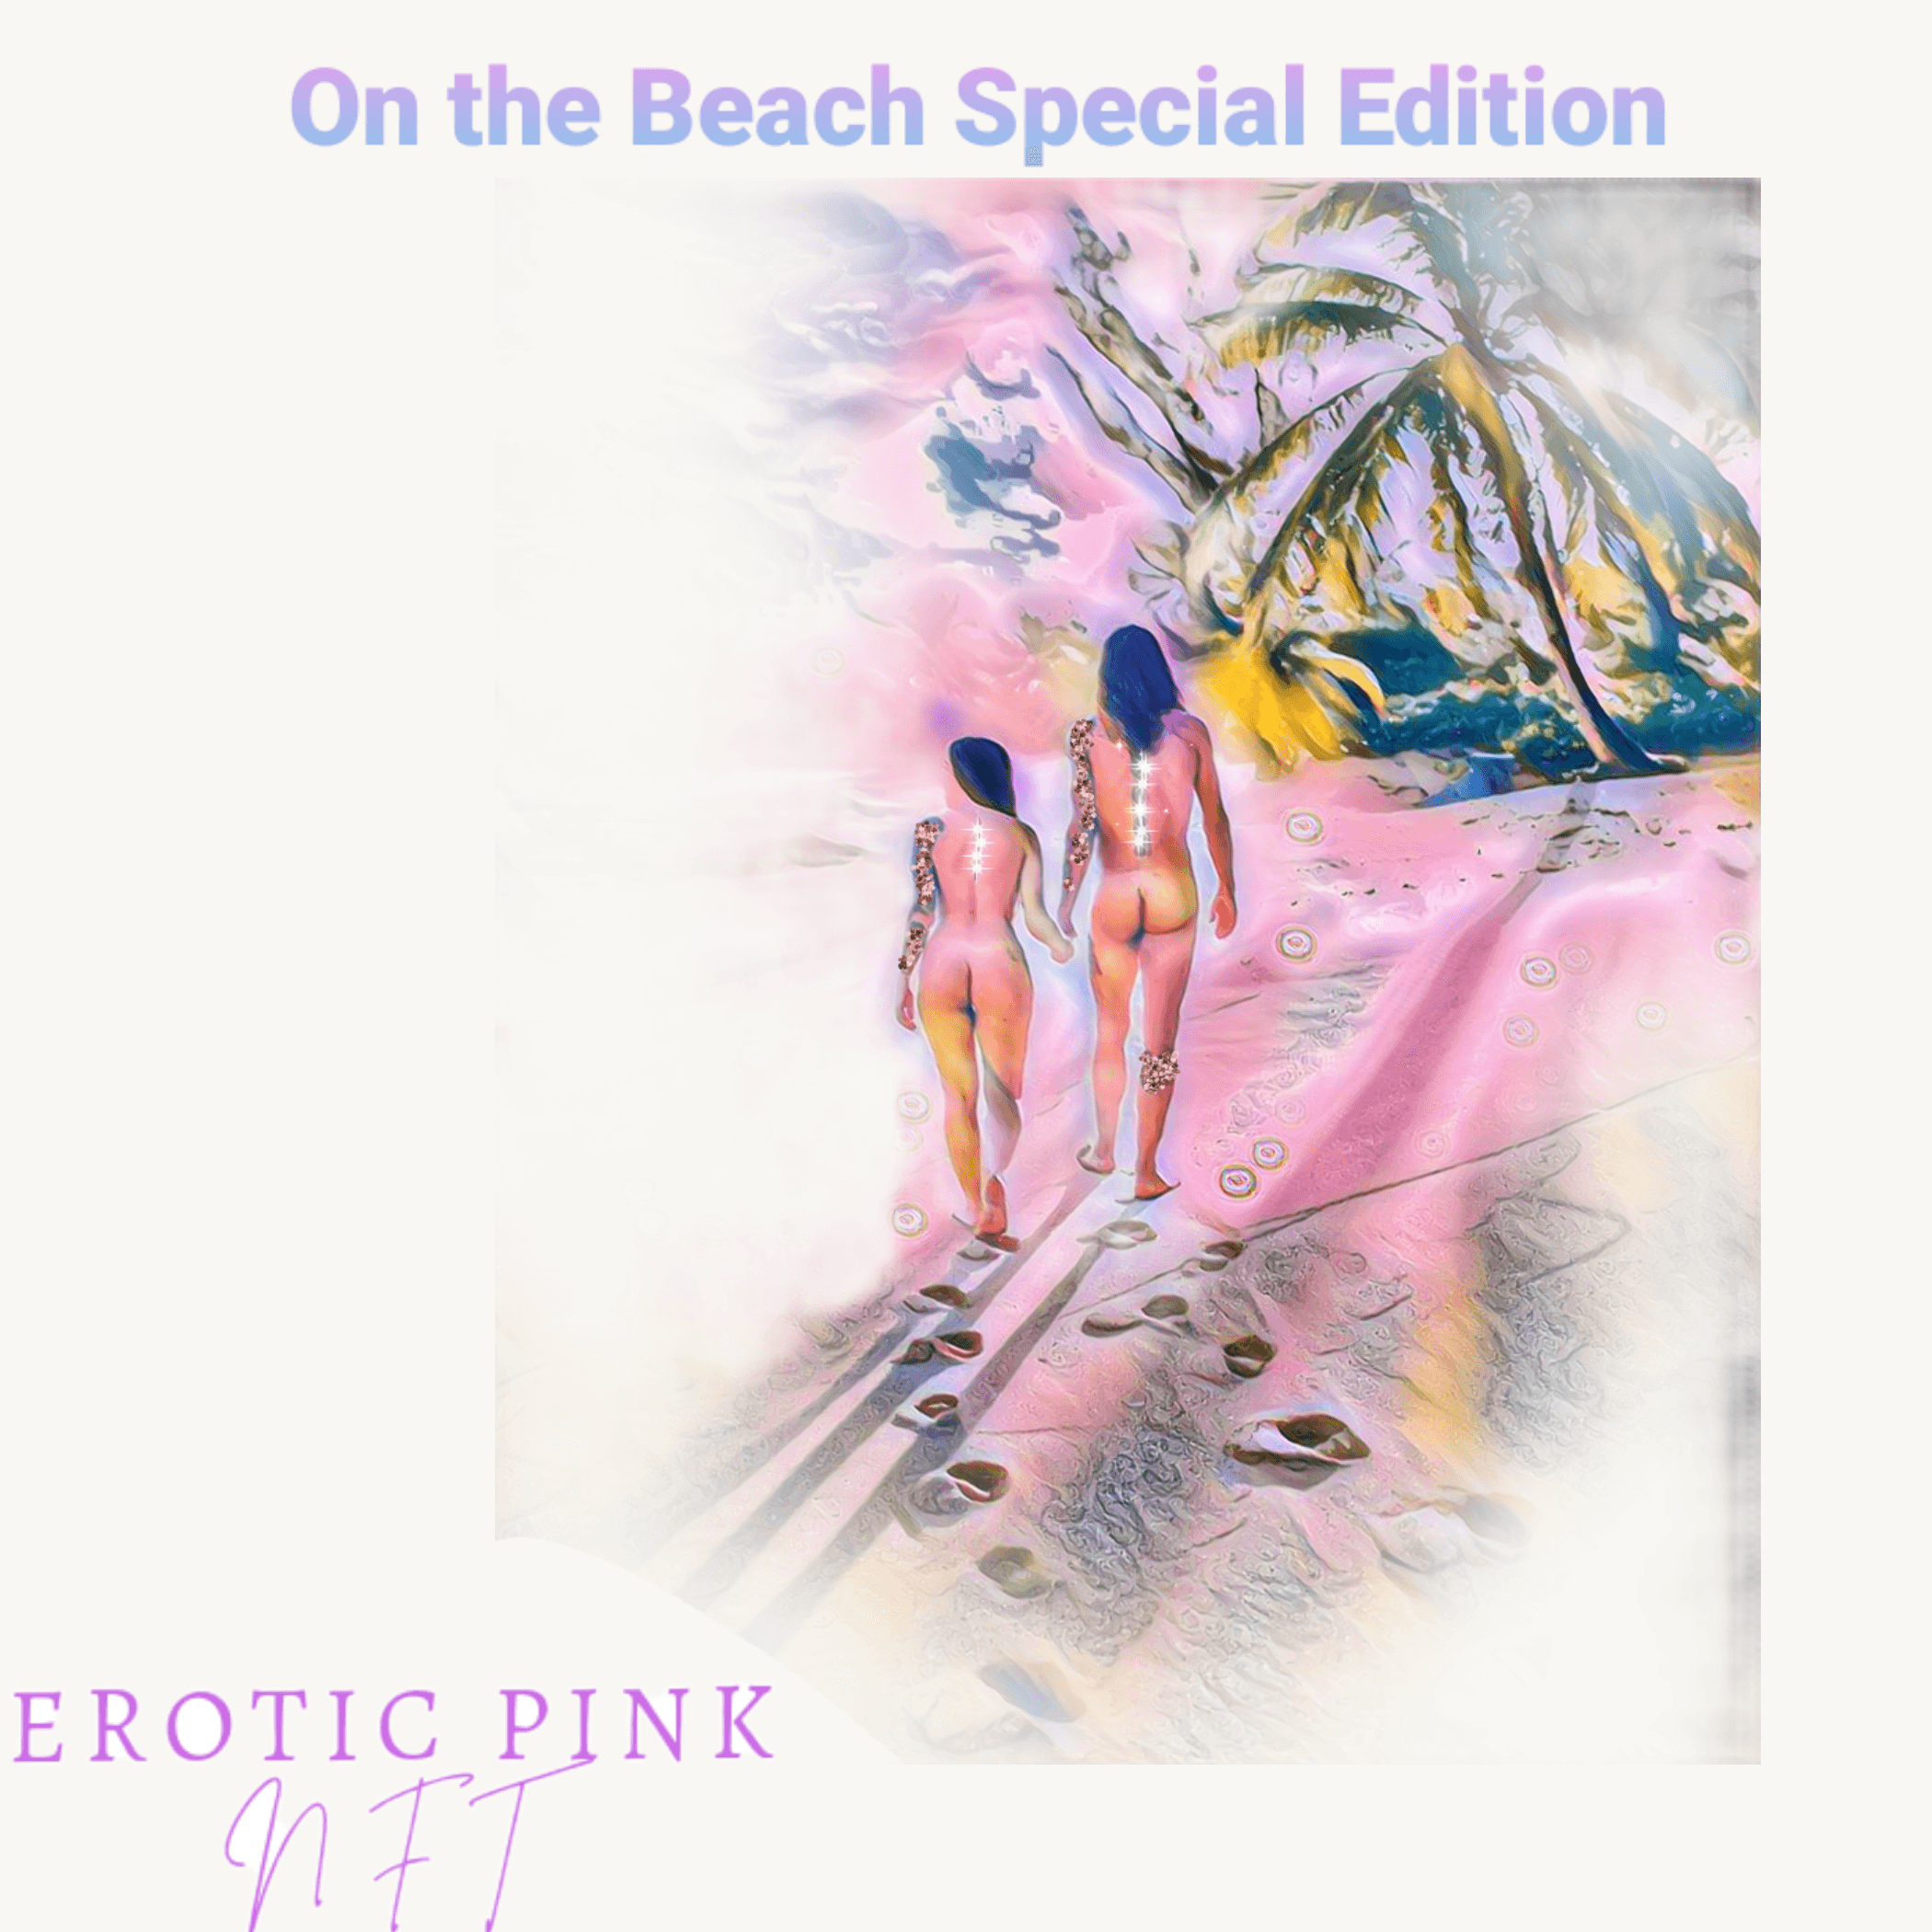 On the Beach Special Edition